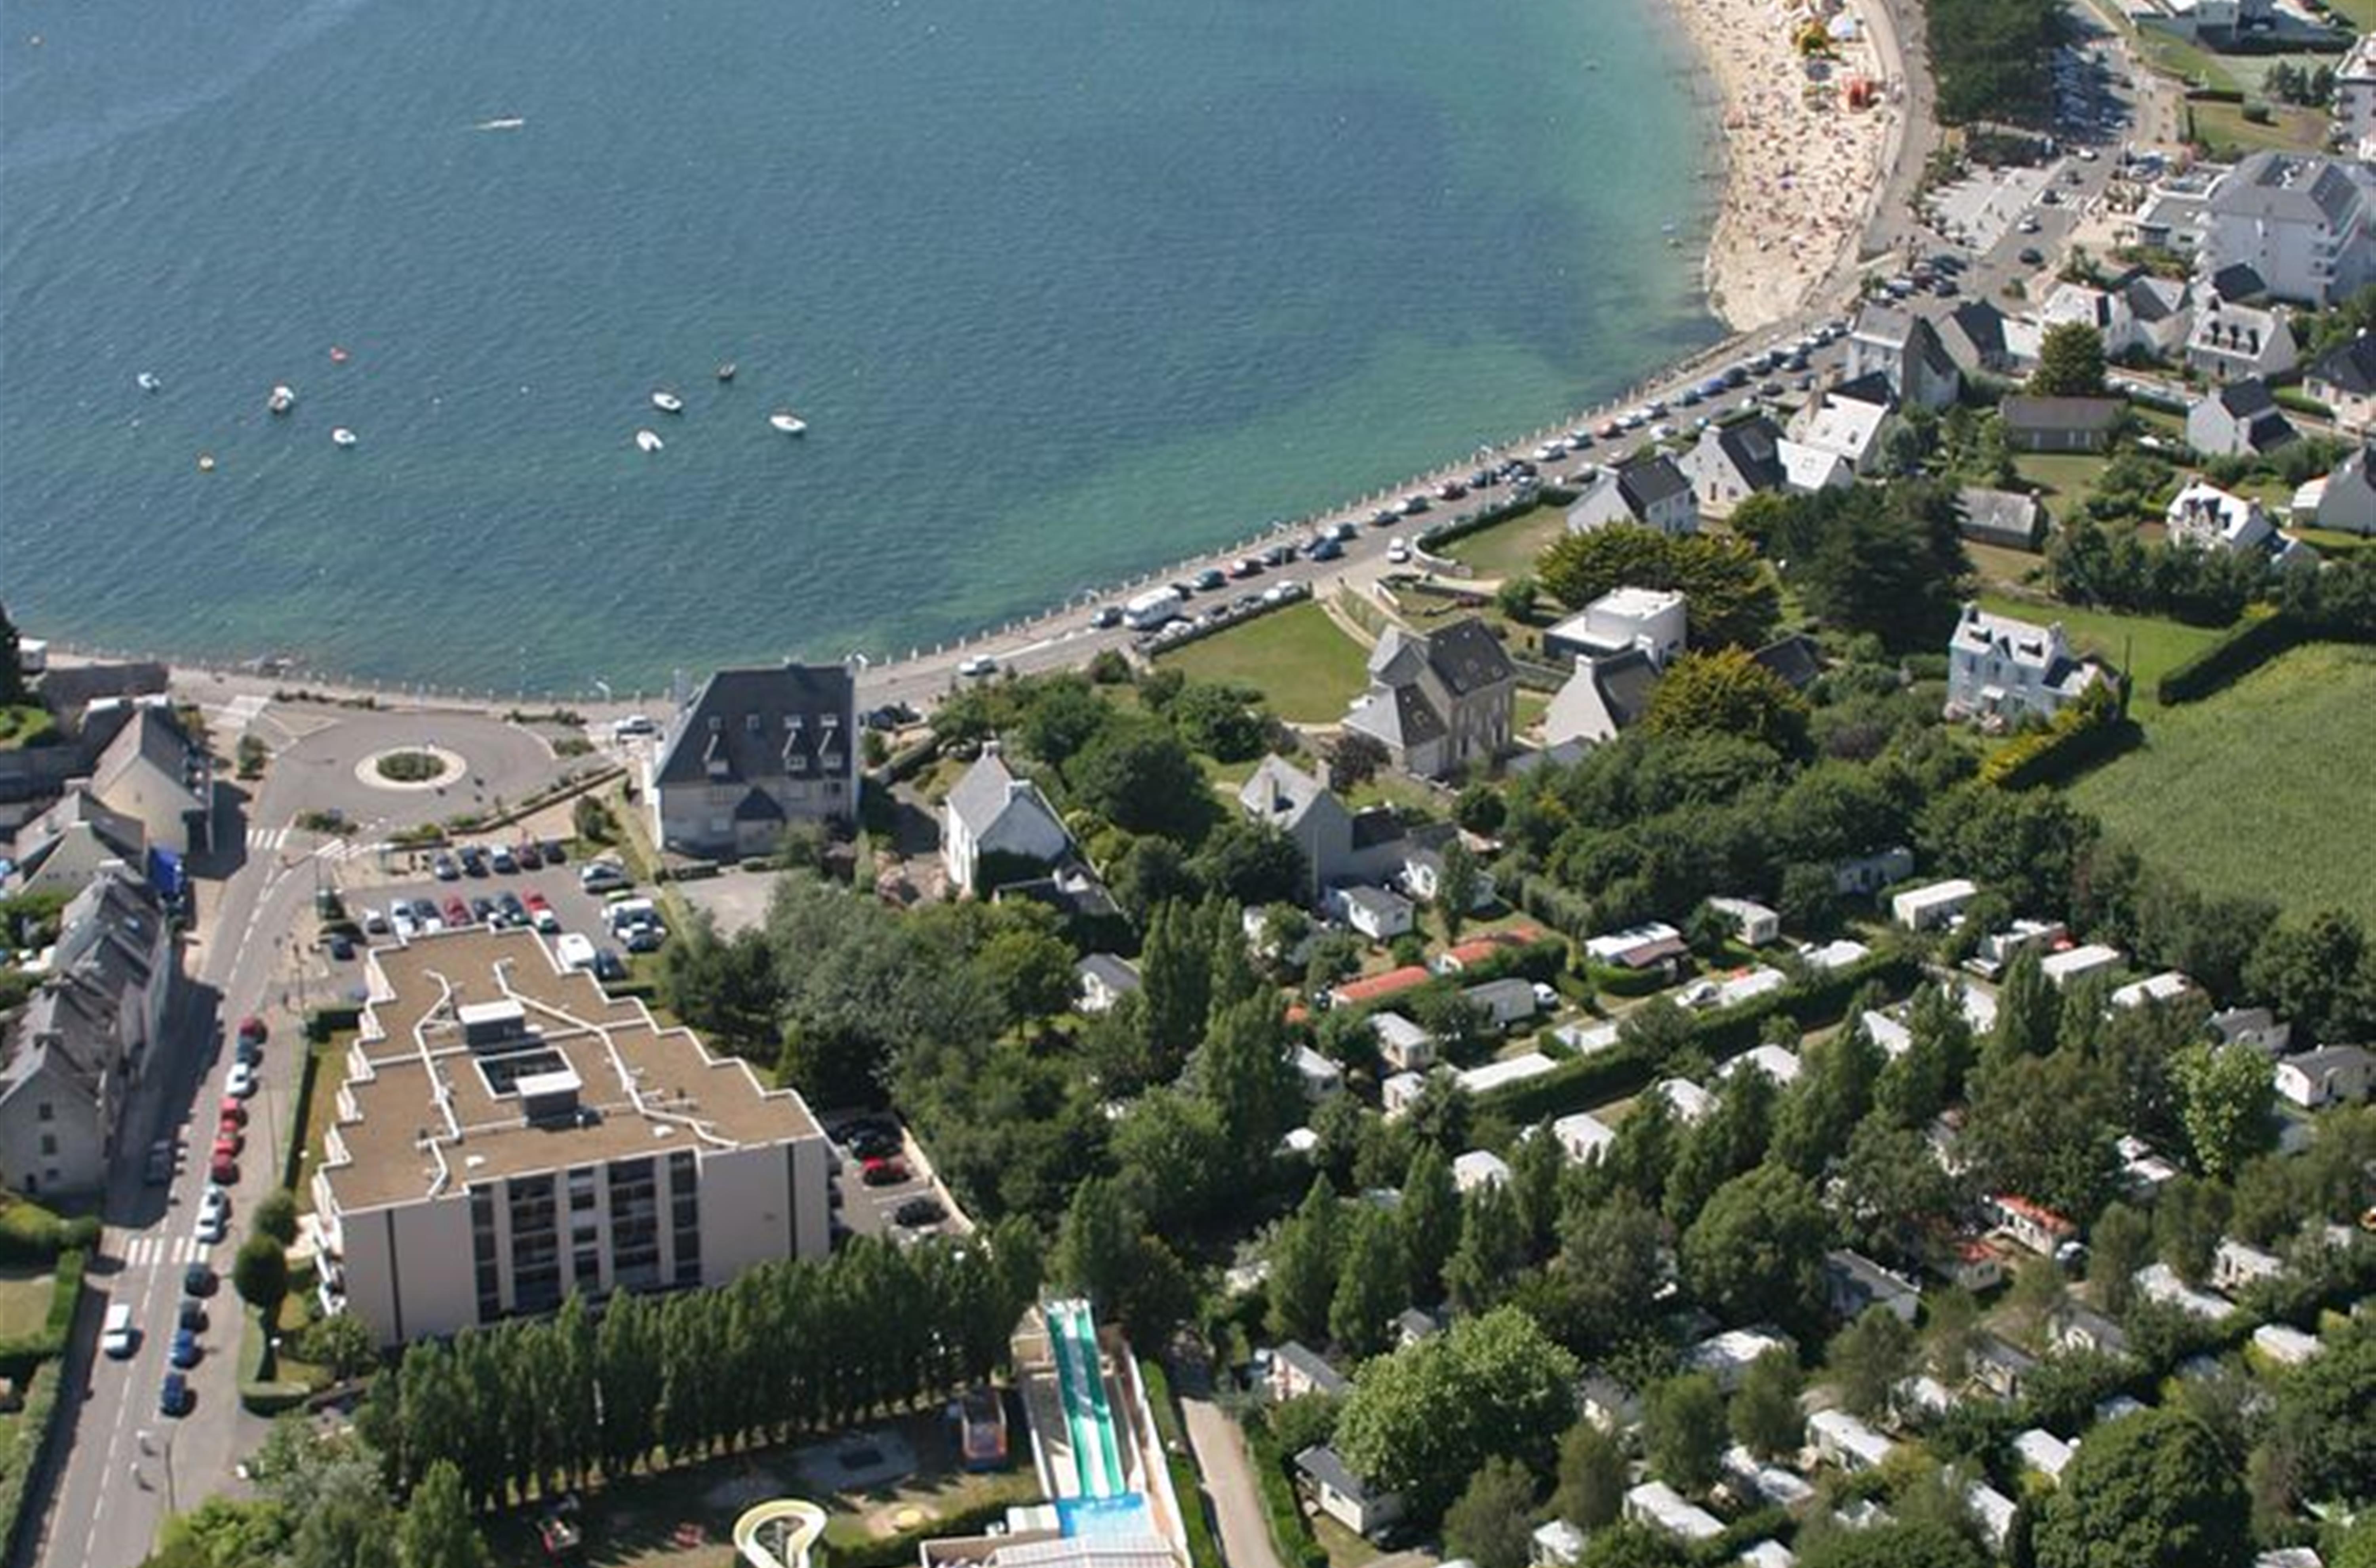 Campsite de la Plage in benodet is only 300 m from the seafront